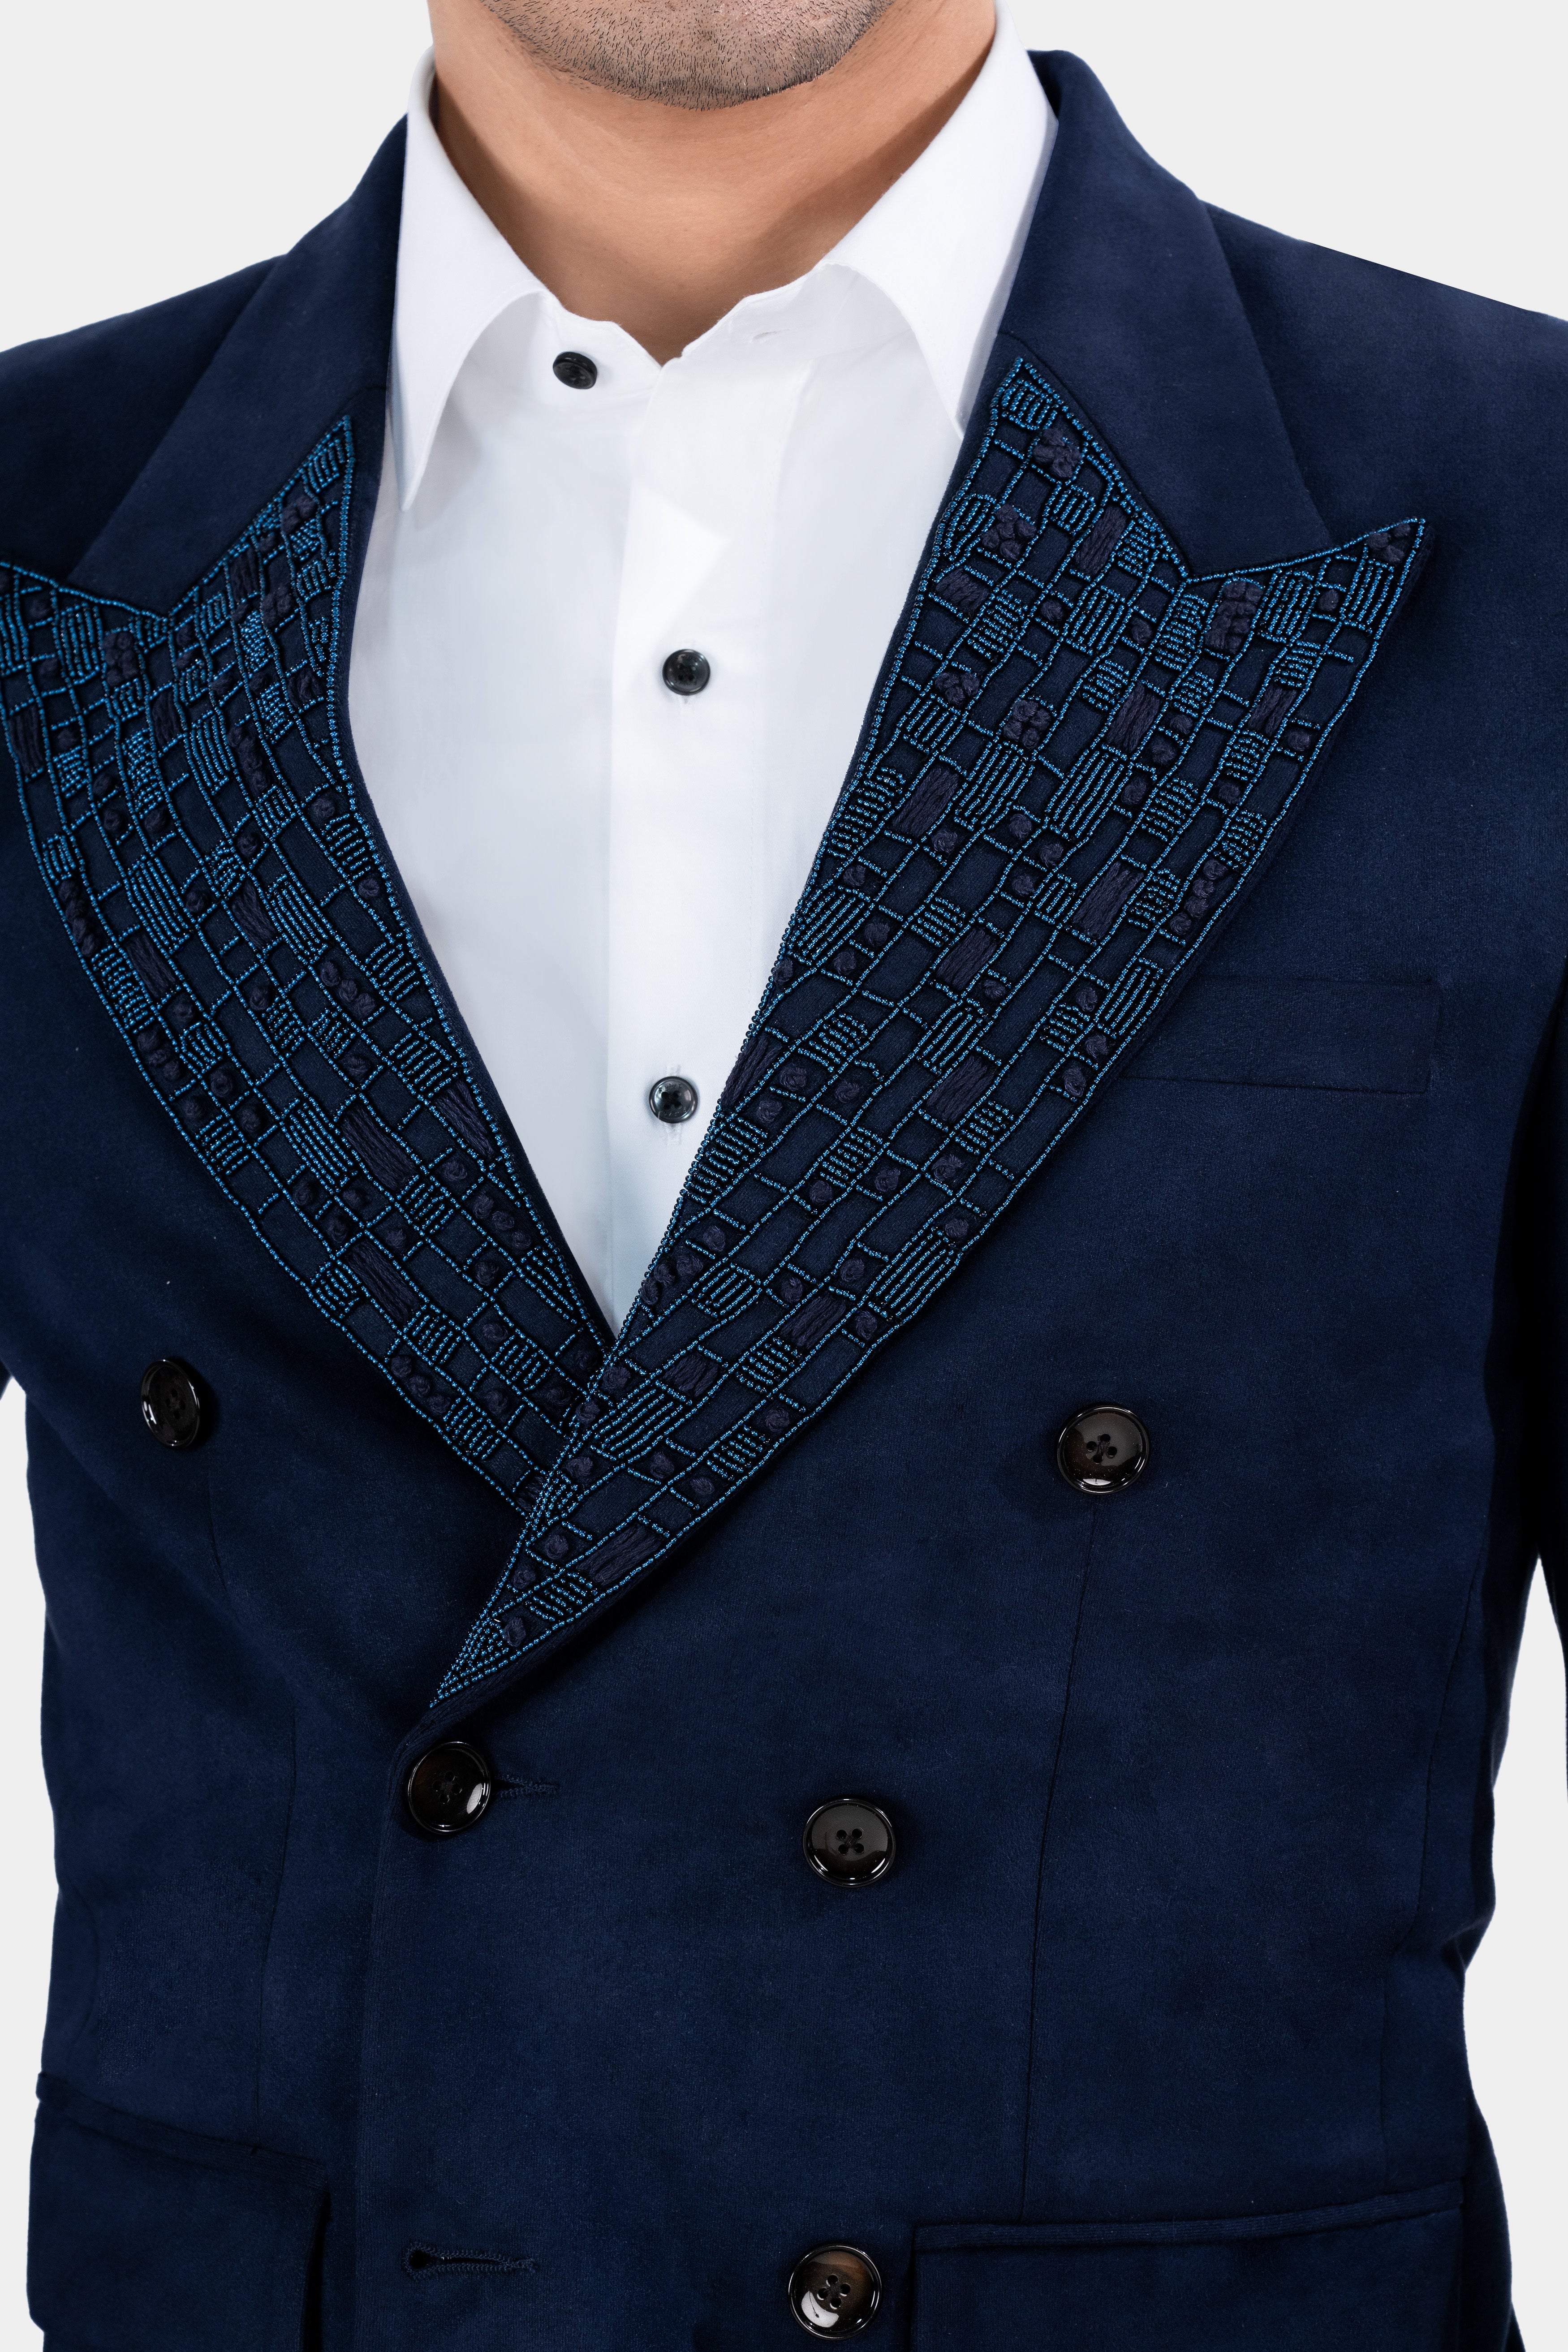 Midnight Blue Double Breasted Stretchable Designer Blazer BL2848-DB-KWL-D120-36, BL2848-DB-KWL-D120-38, BL2848-DB-KWL-D120-40, BL2848-DB-KWL-D120-42, BL2848-DB-KWL-D120-44, BL2848-DB-KWL-D120-46, BL2848-DB-KWL-D120-48, BL2848-DB-KWL-D120-50, BL2848-DB-KWL-D120-52, BL2848-DB-KWL-D120-54, BL2848-DB-KWL-D120-56, BL2848-DB-KWL-D120-58, BL2848-DB-KWL-D120-60